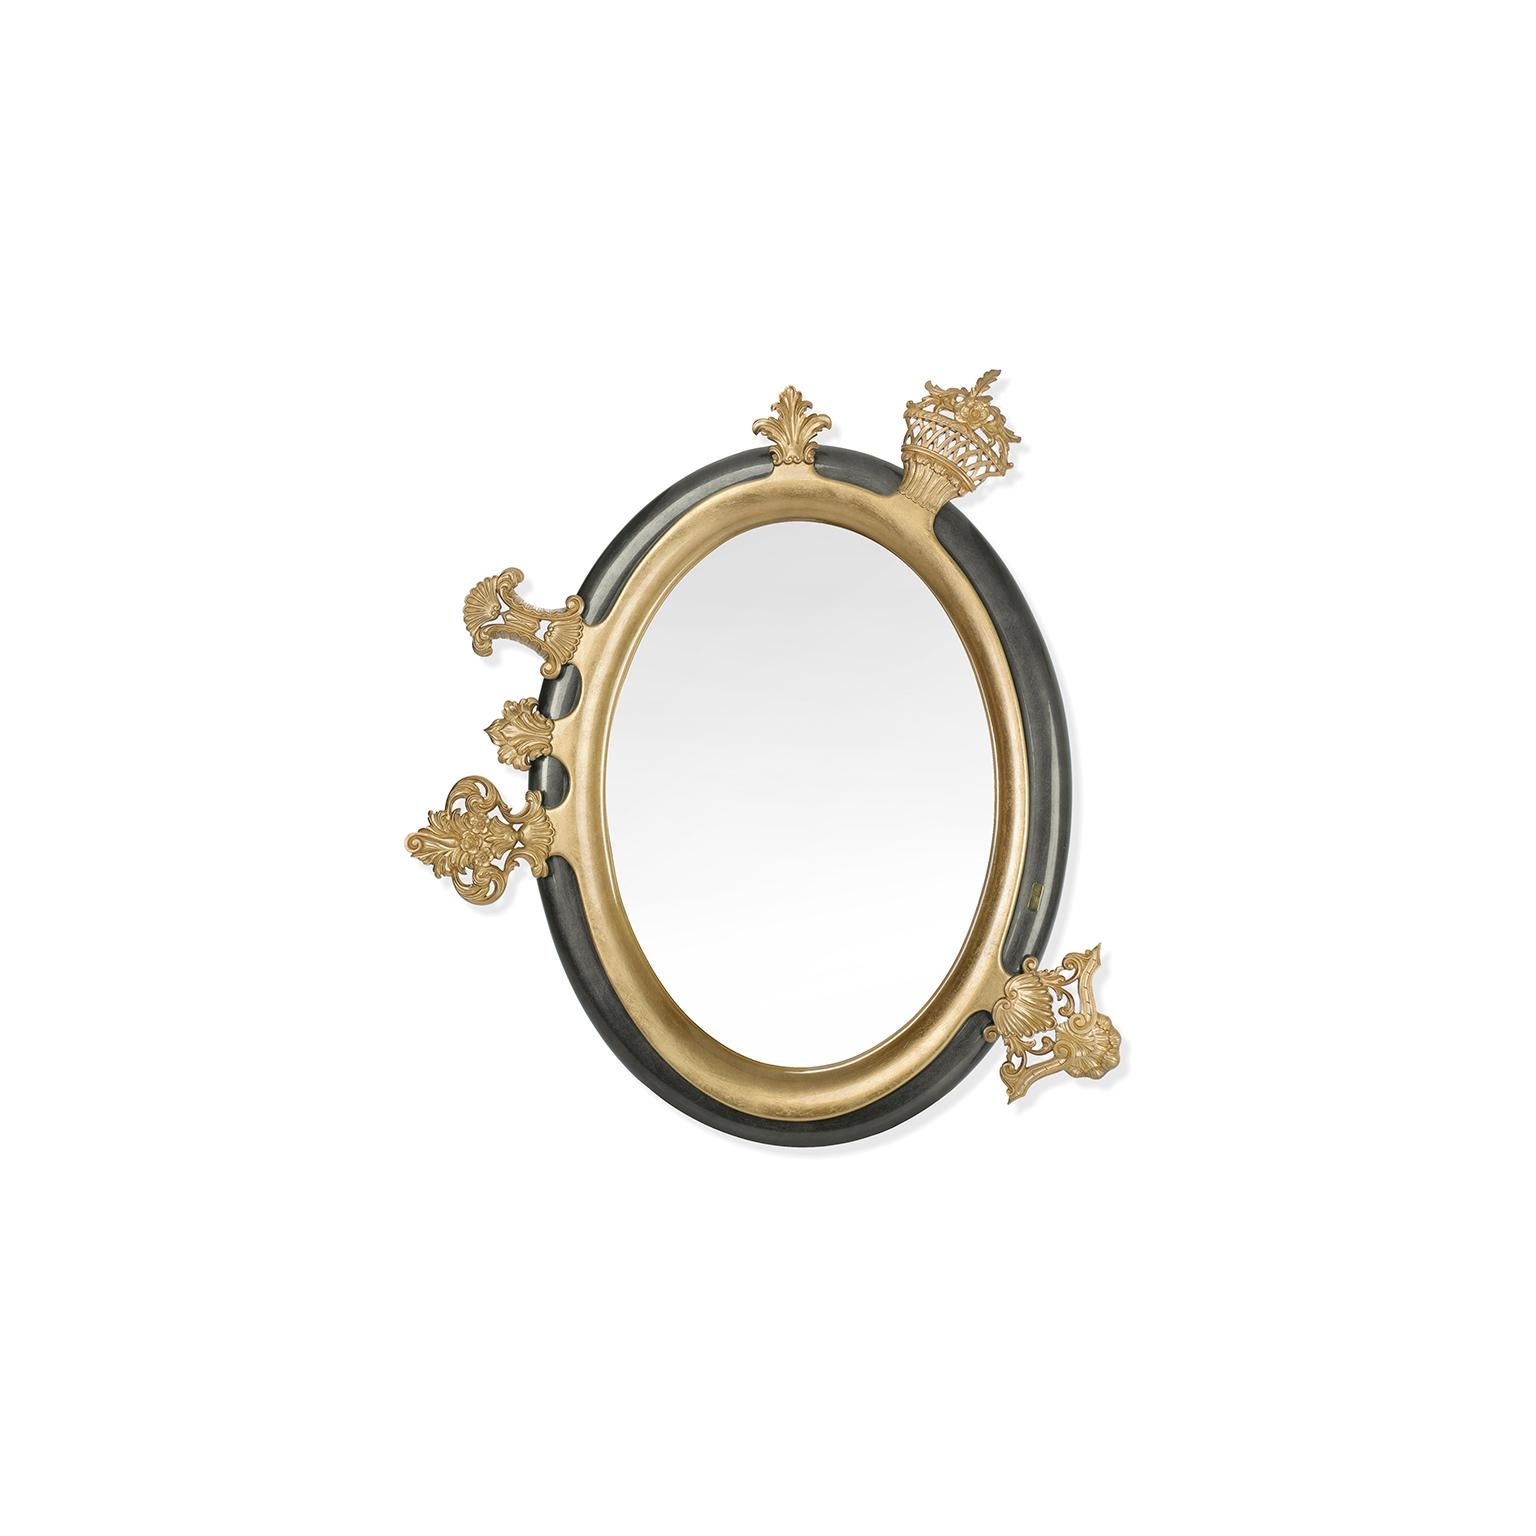 Inspiration:  
Sissi of Austria and Hungary is a central figure of history and European imaginary. As such, Bessa has created a piece that honours her life and elegance. Sissi mirror is finished in gold leaf and boasts asymmetric artistry, recalling